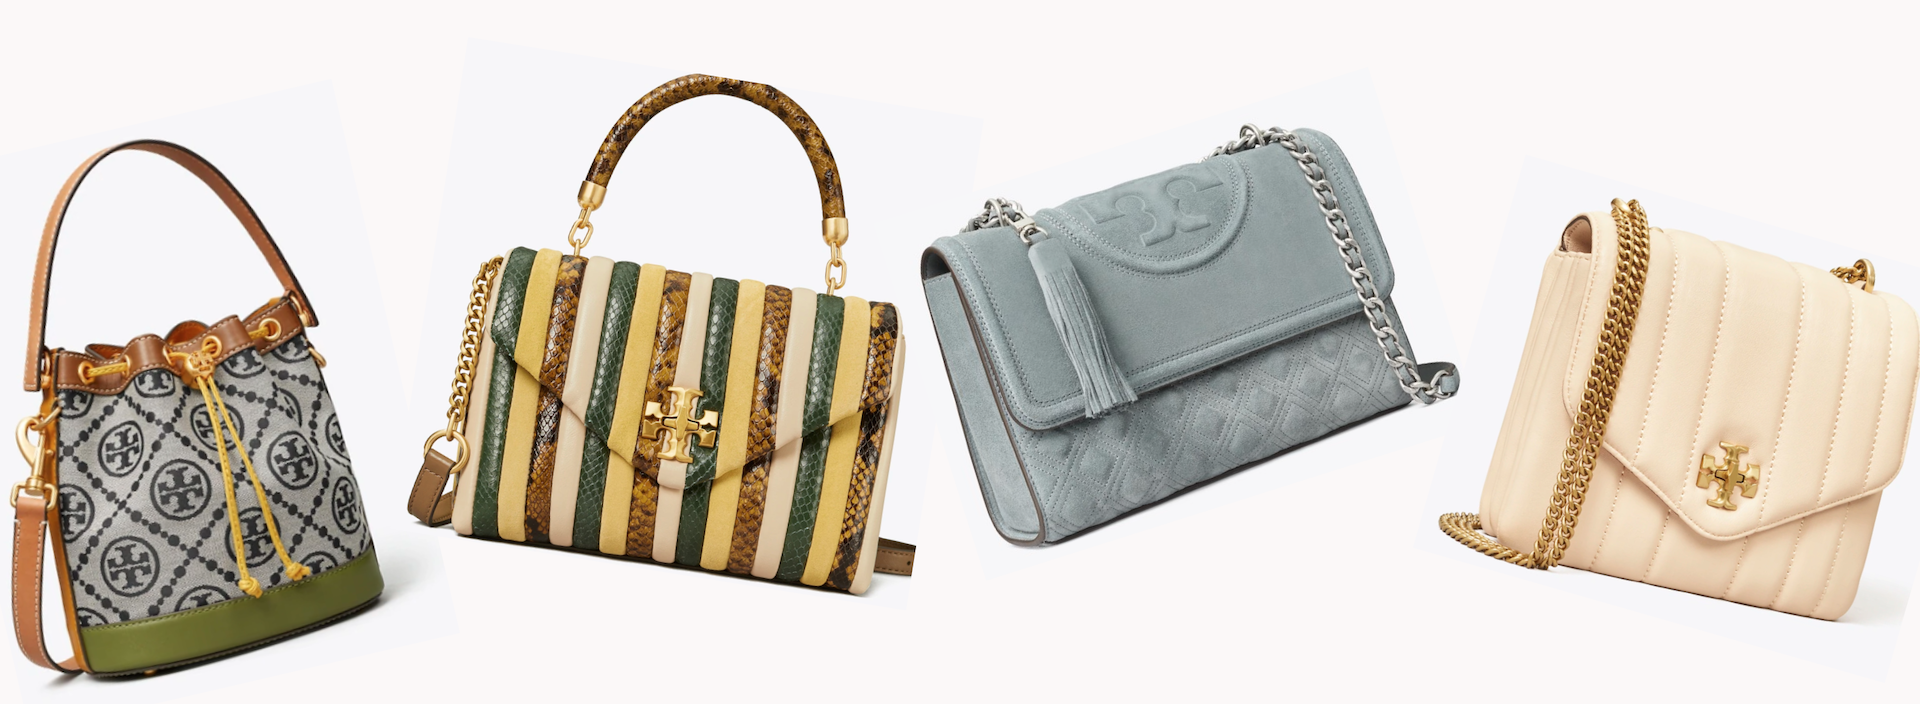 With fall already present, Tory Burch has the best new purse lineup that is stylish and practical. These are some of our favorites.